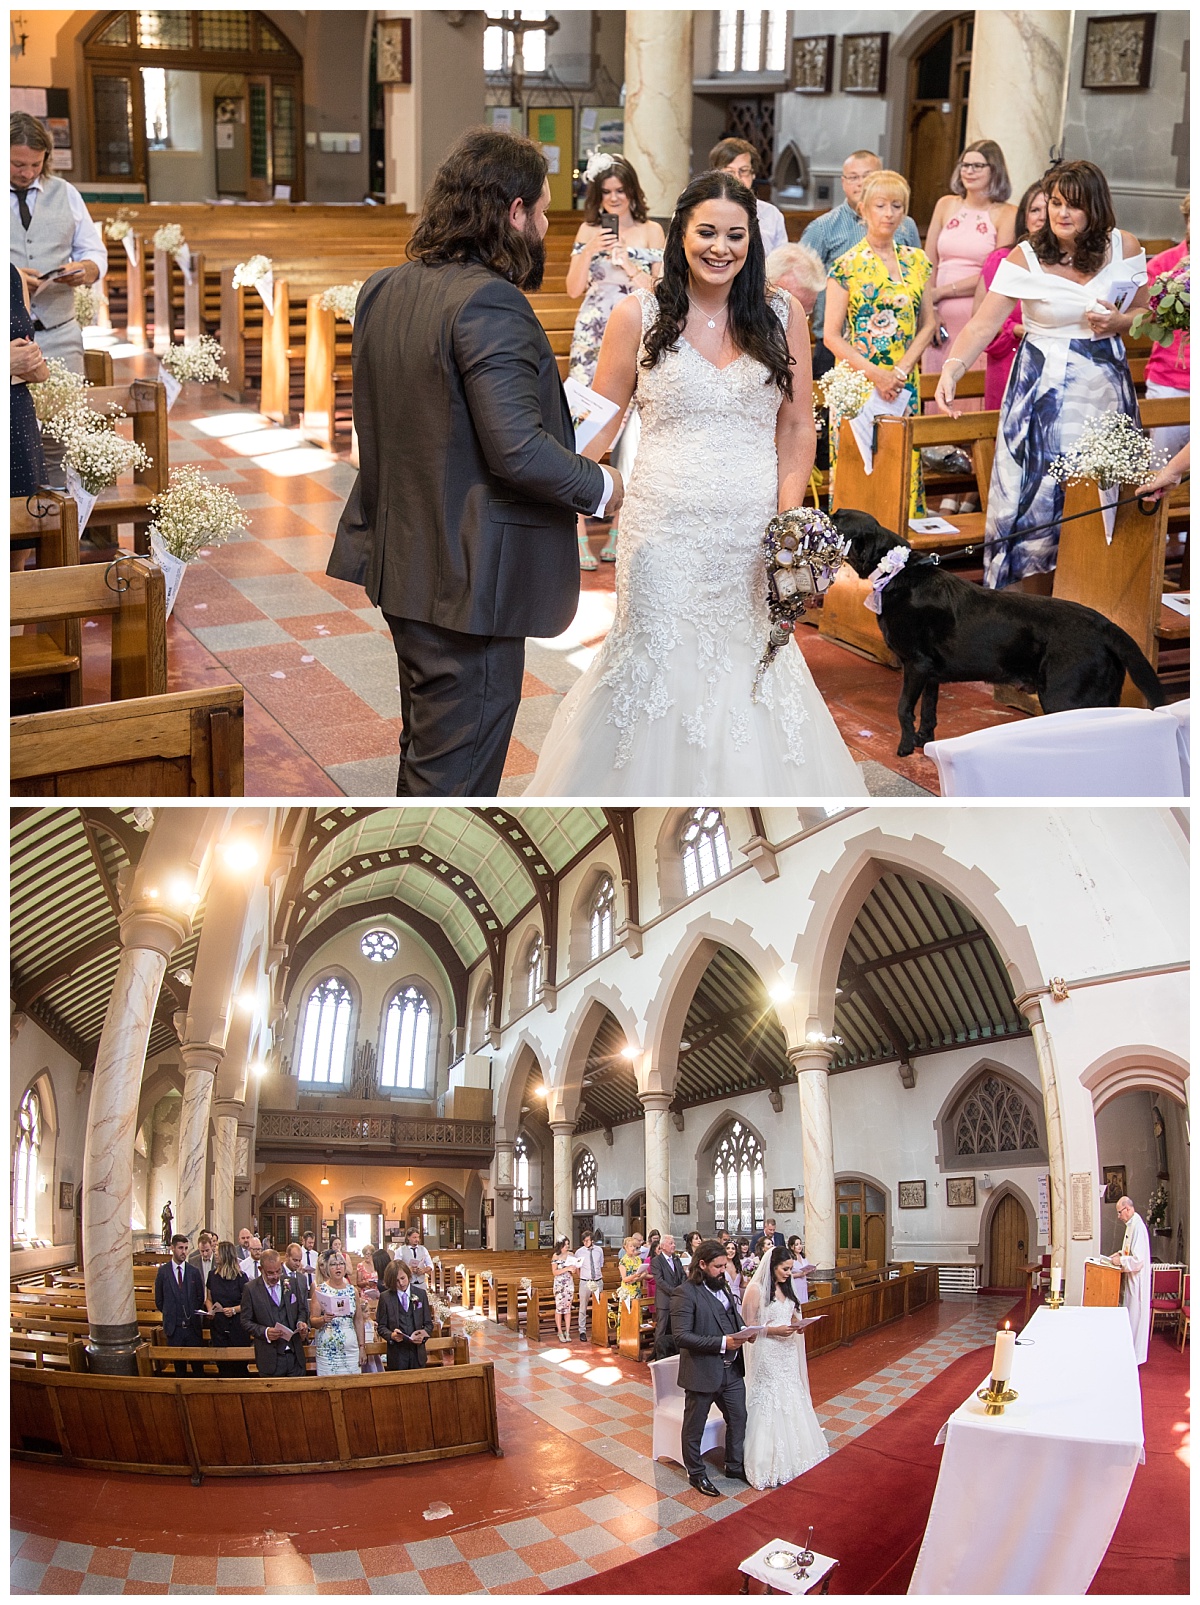 Wedding Photography Manchester - Lauren and Colyn's Wizard Wedding 26